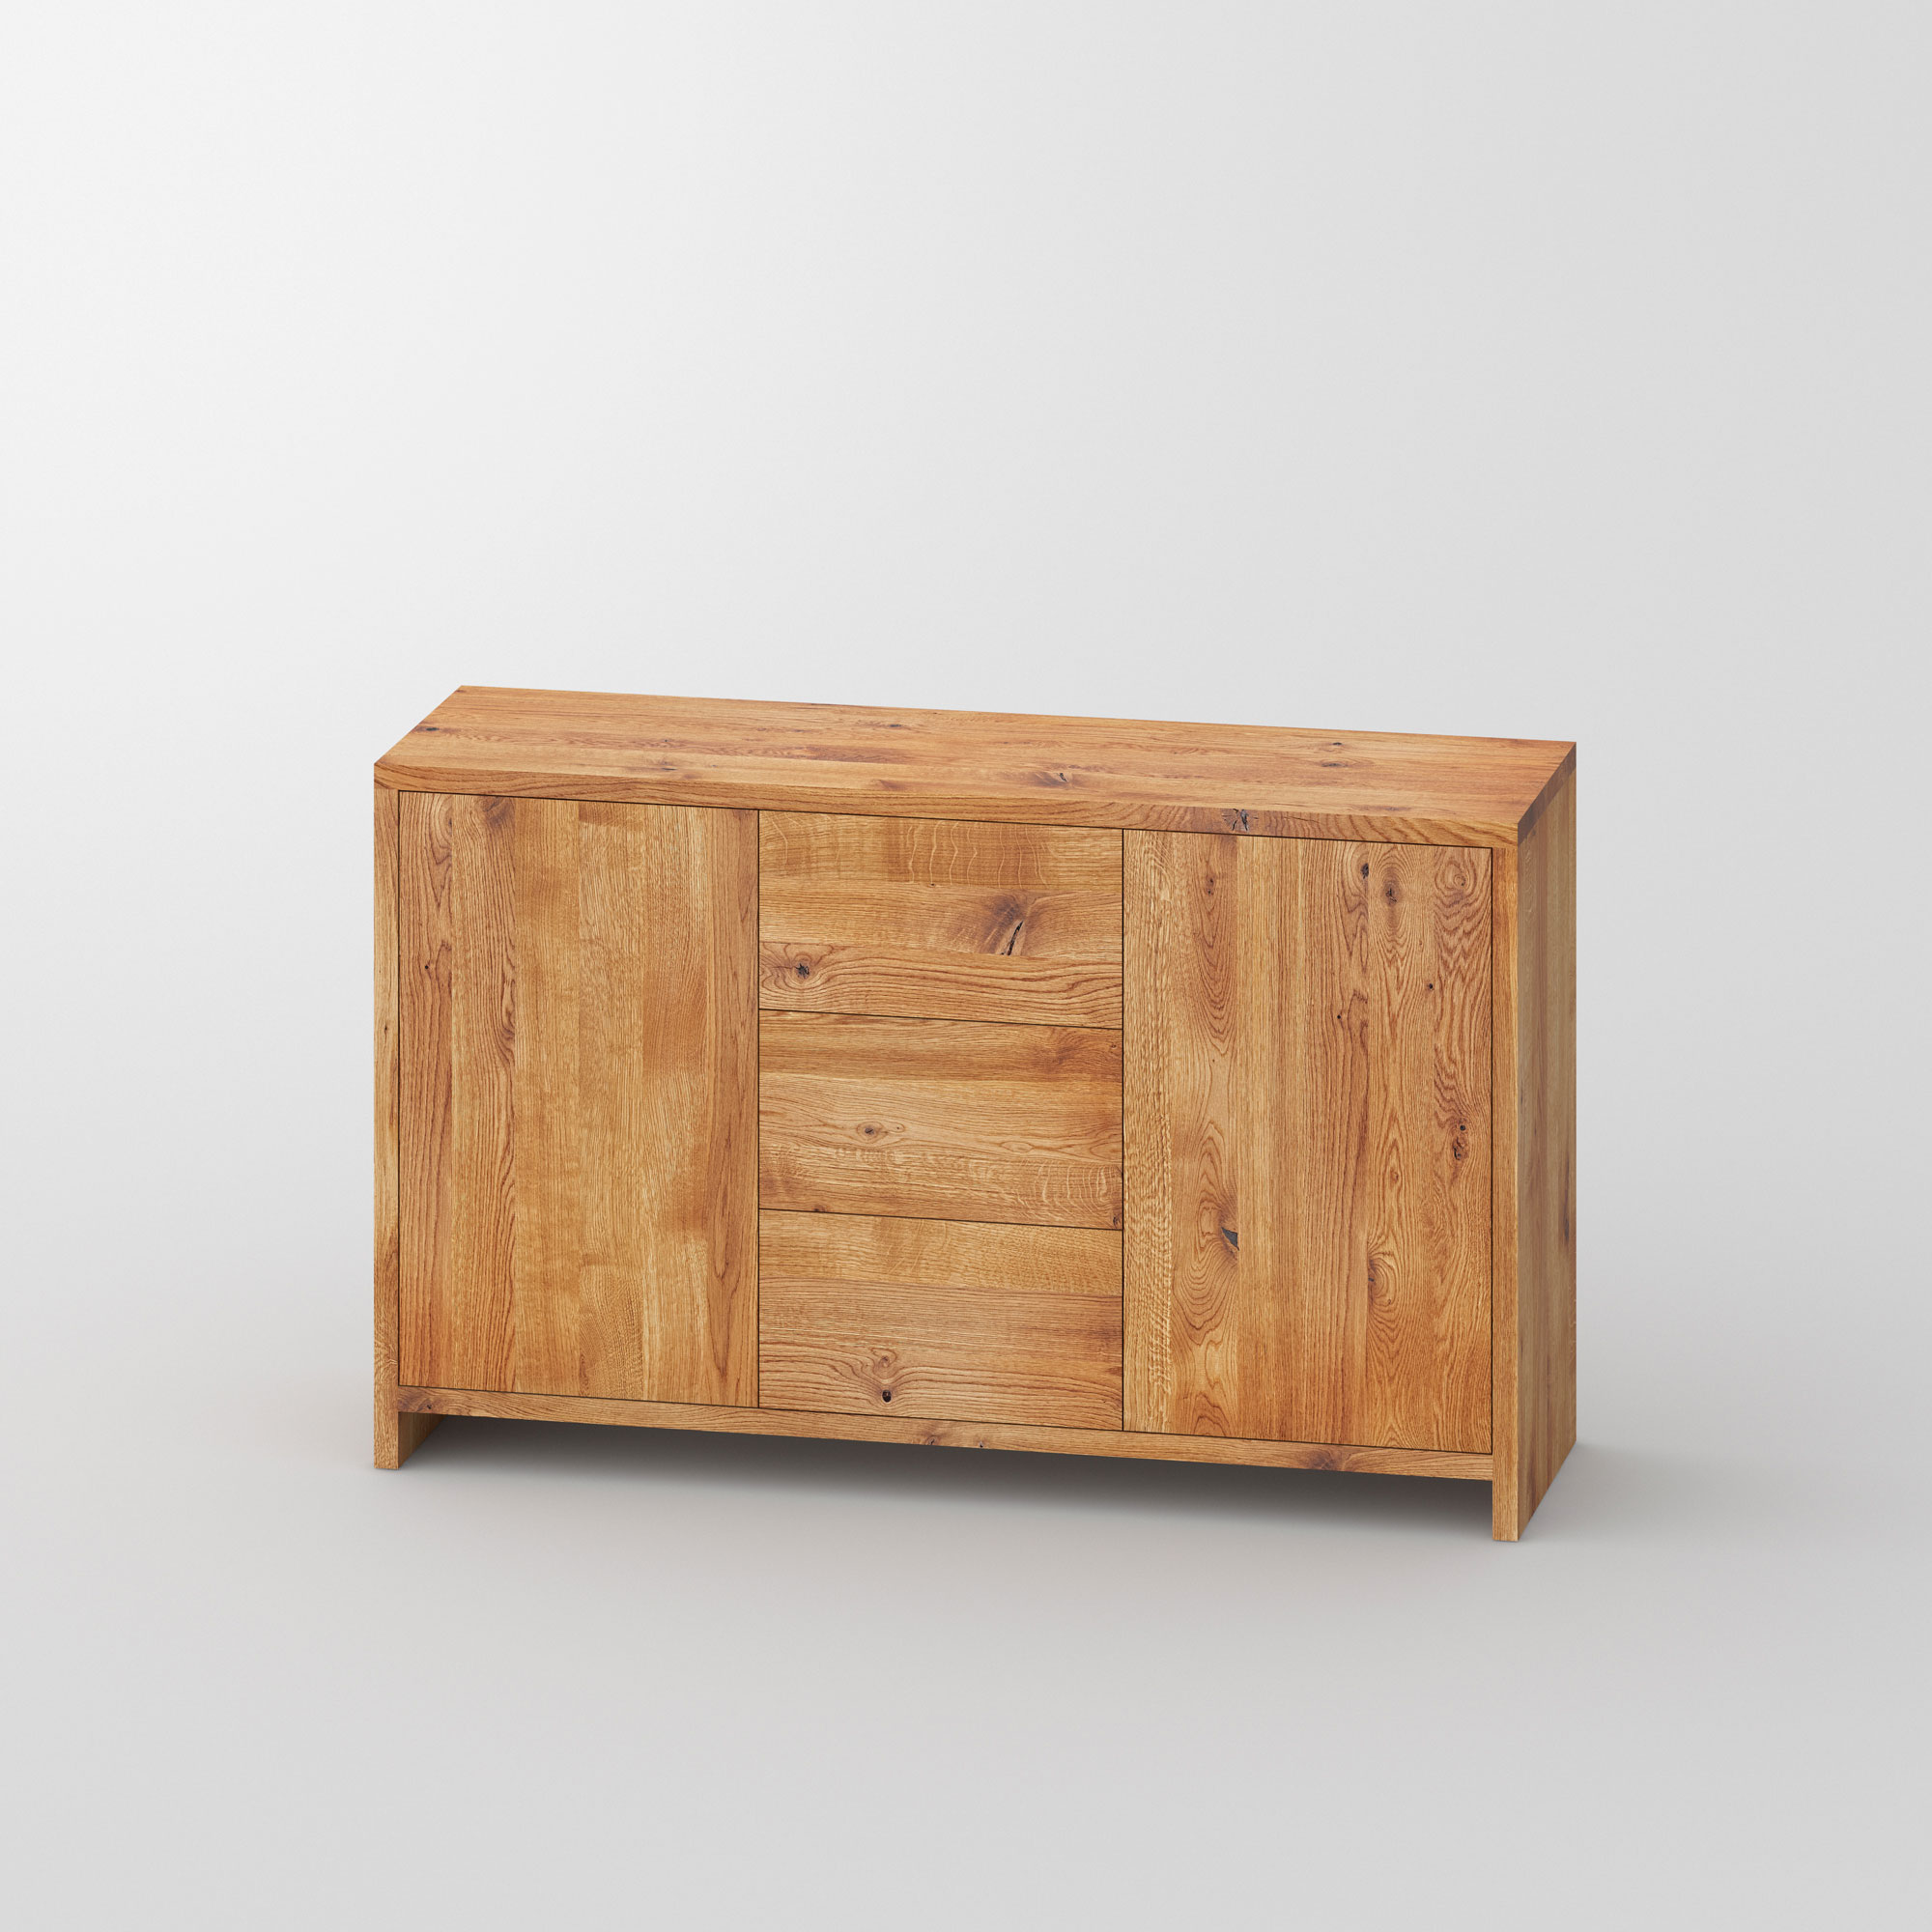 Tailor-Made Sideboard MENA F cam1 custom made in solid wood by vitamin design